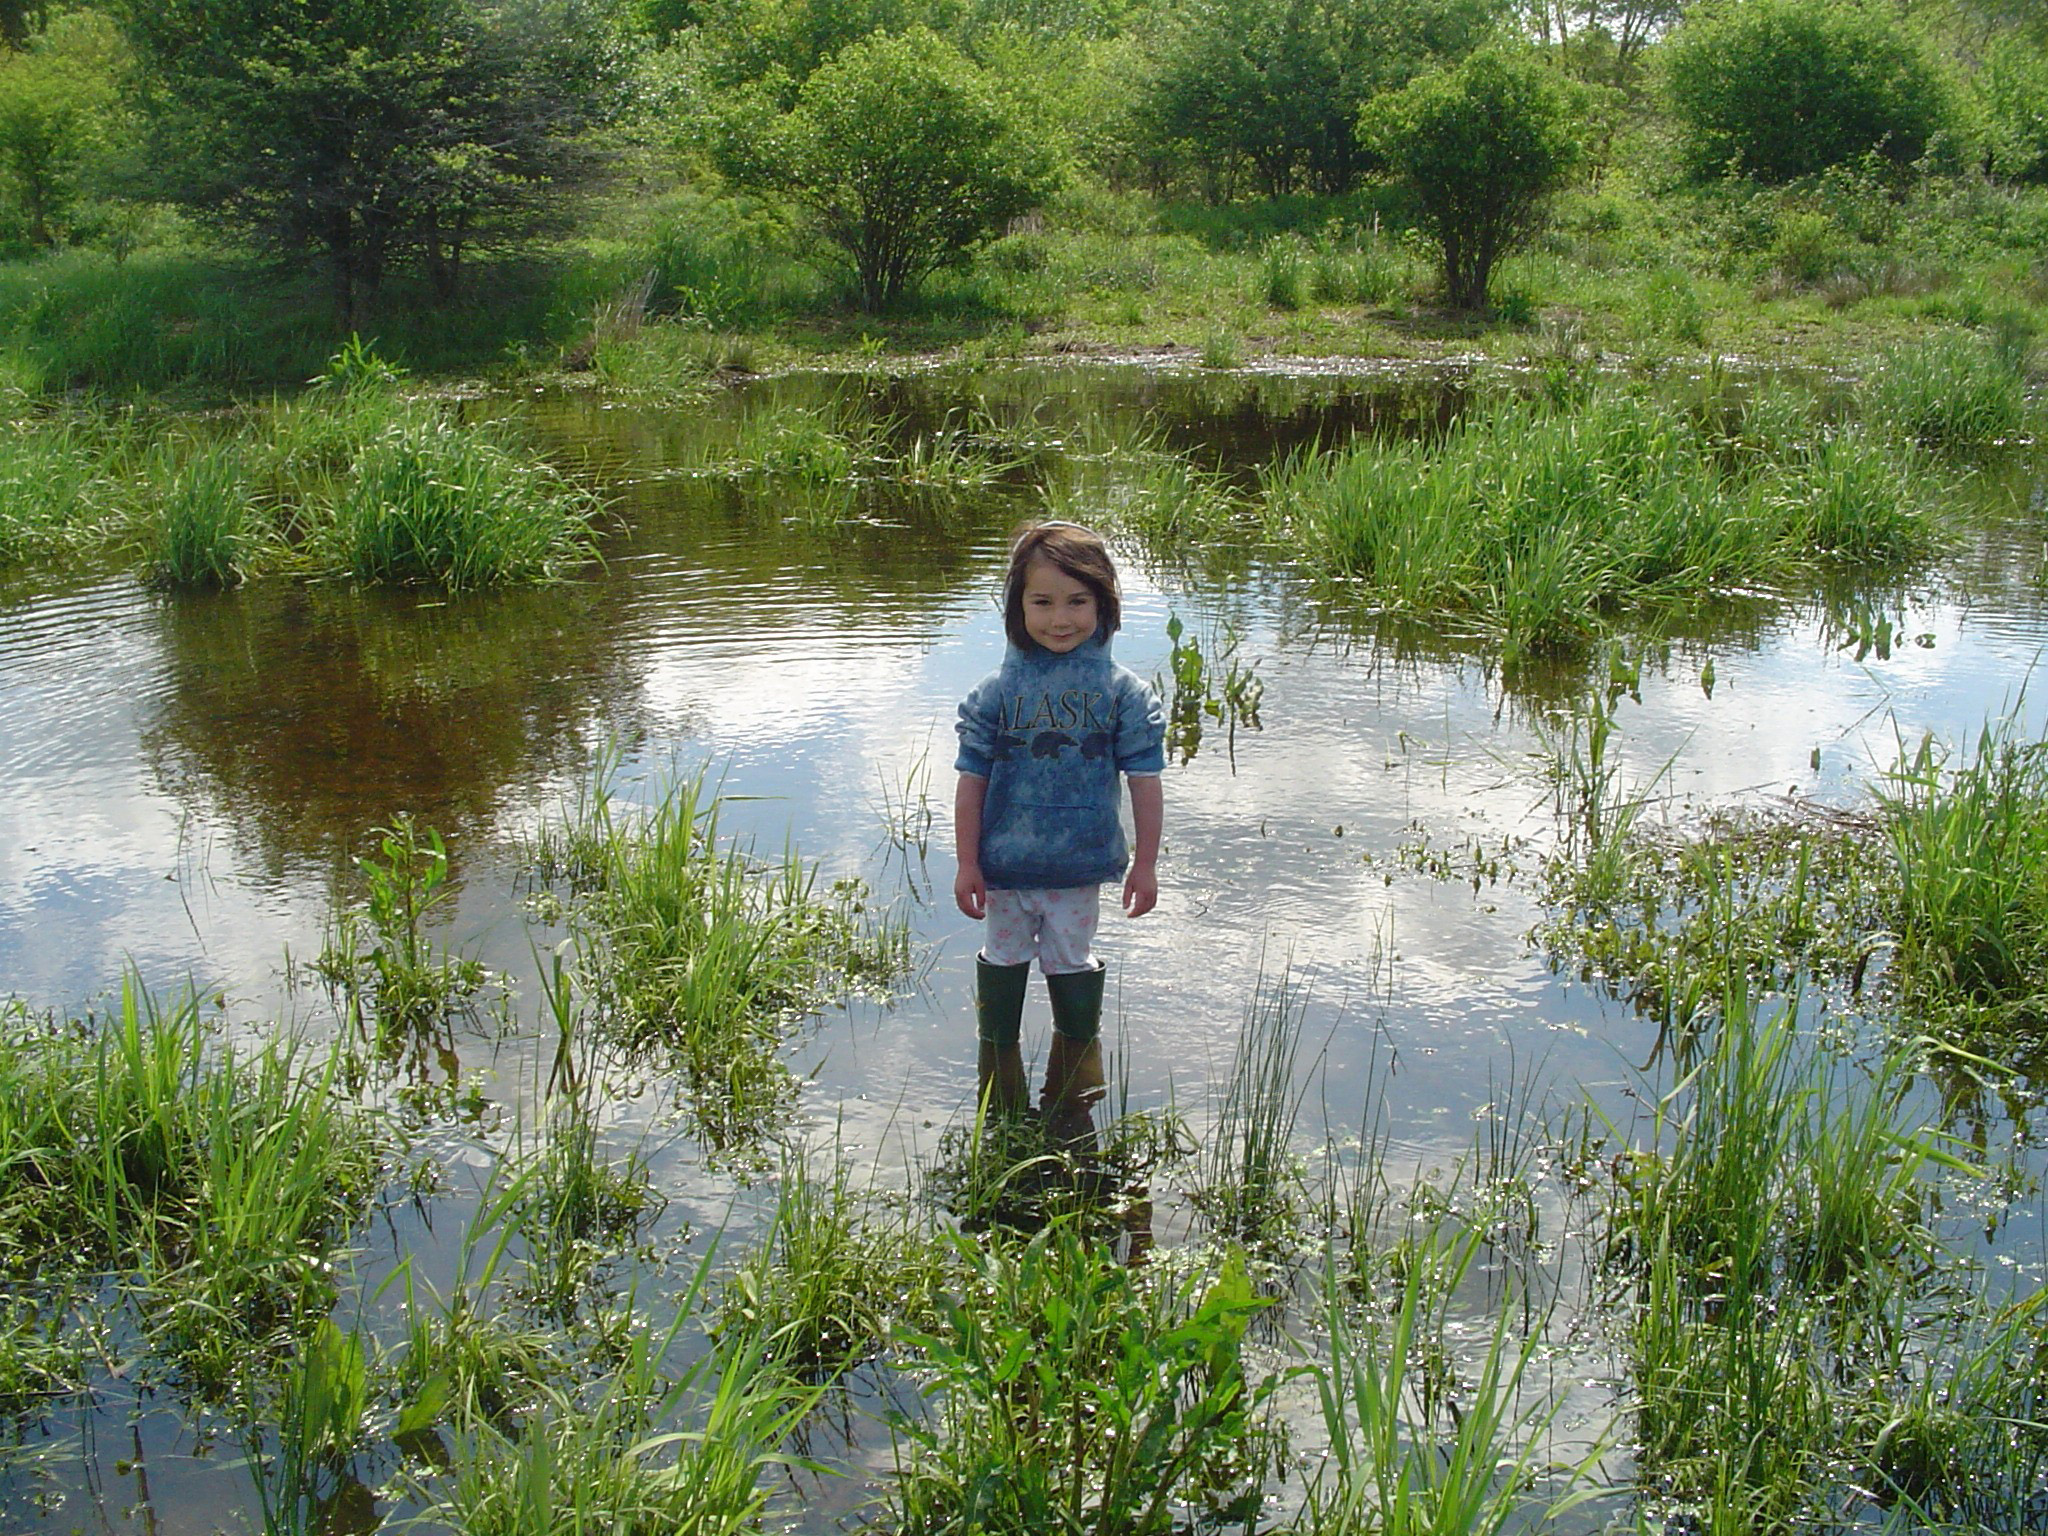 A little girl in rubber boots standing in ankle-deep water with marsh grasses scattered nearby.